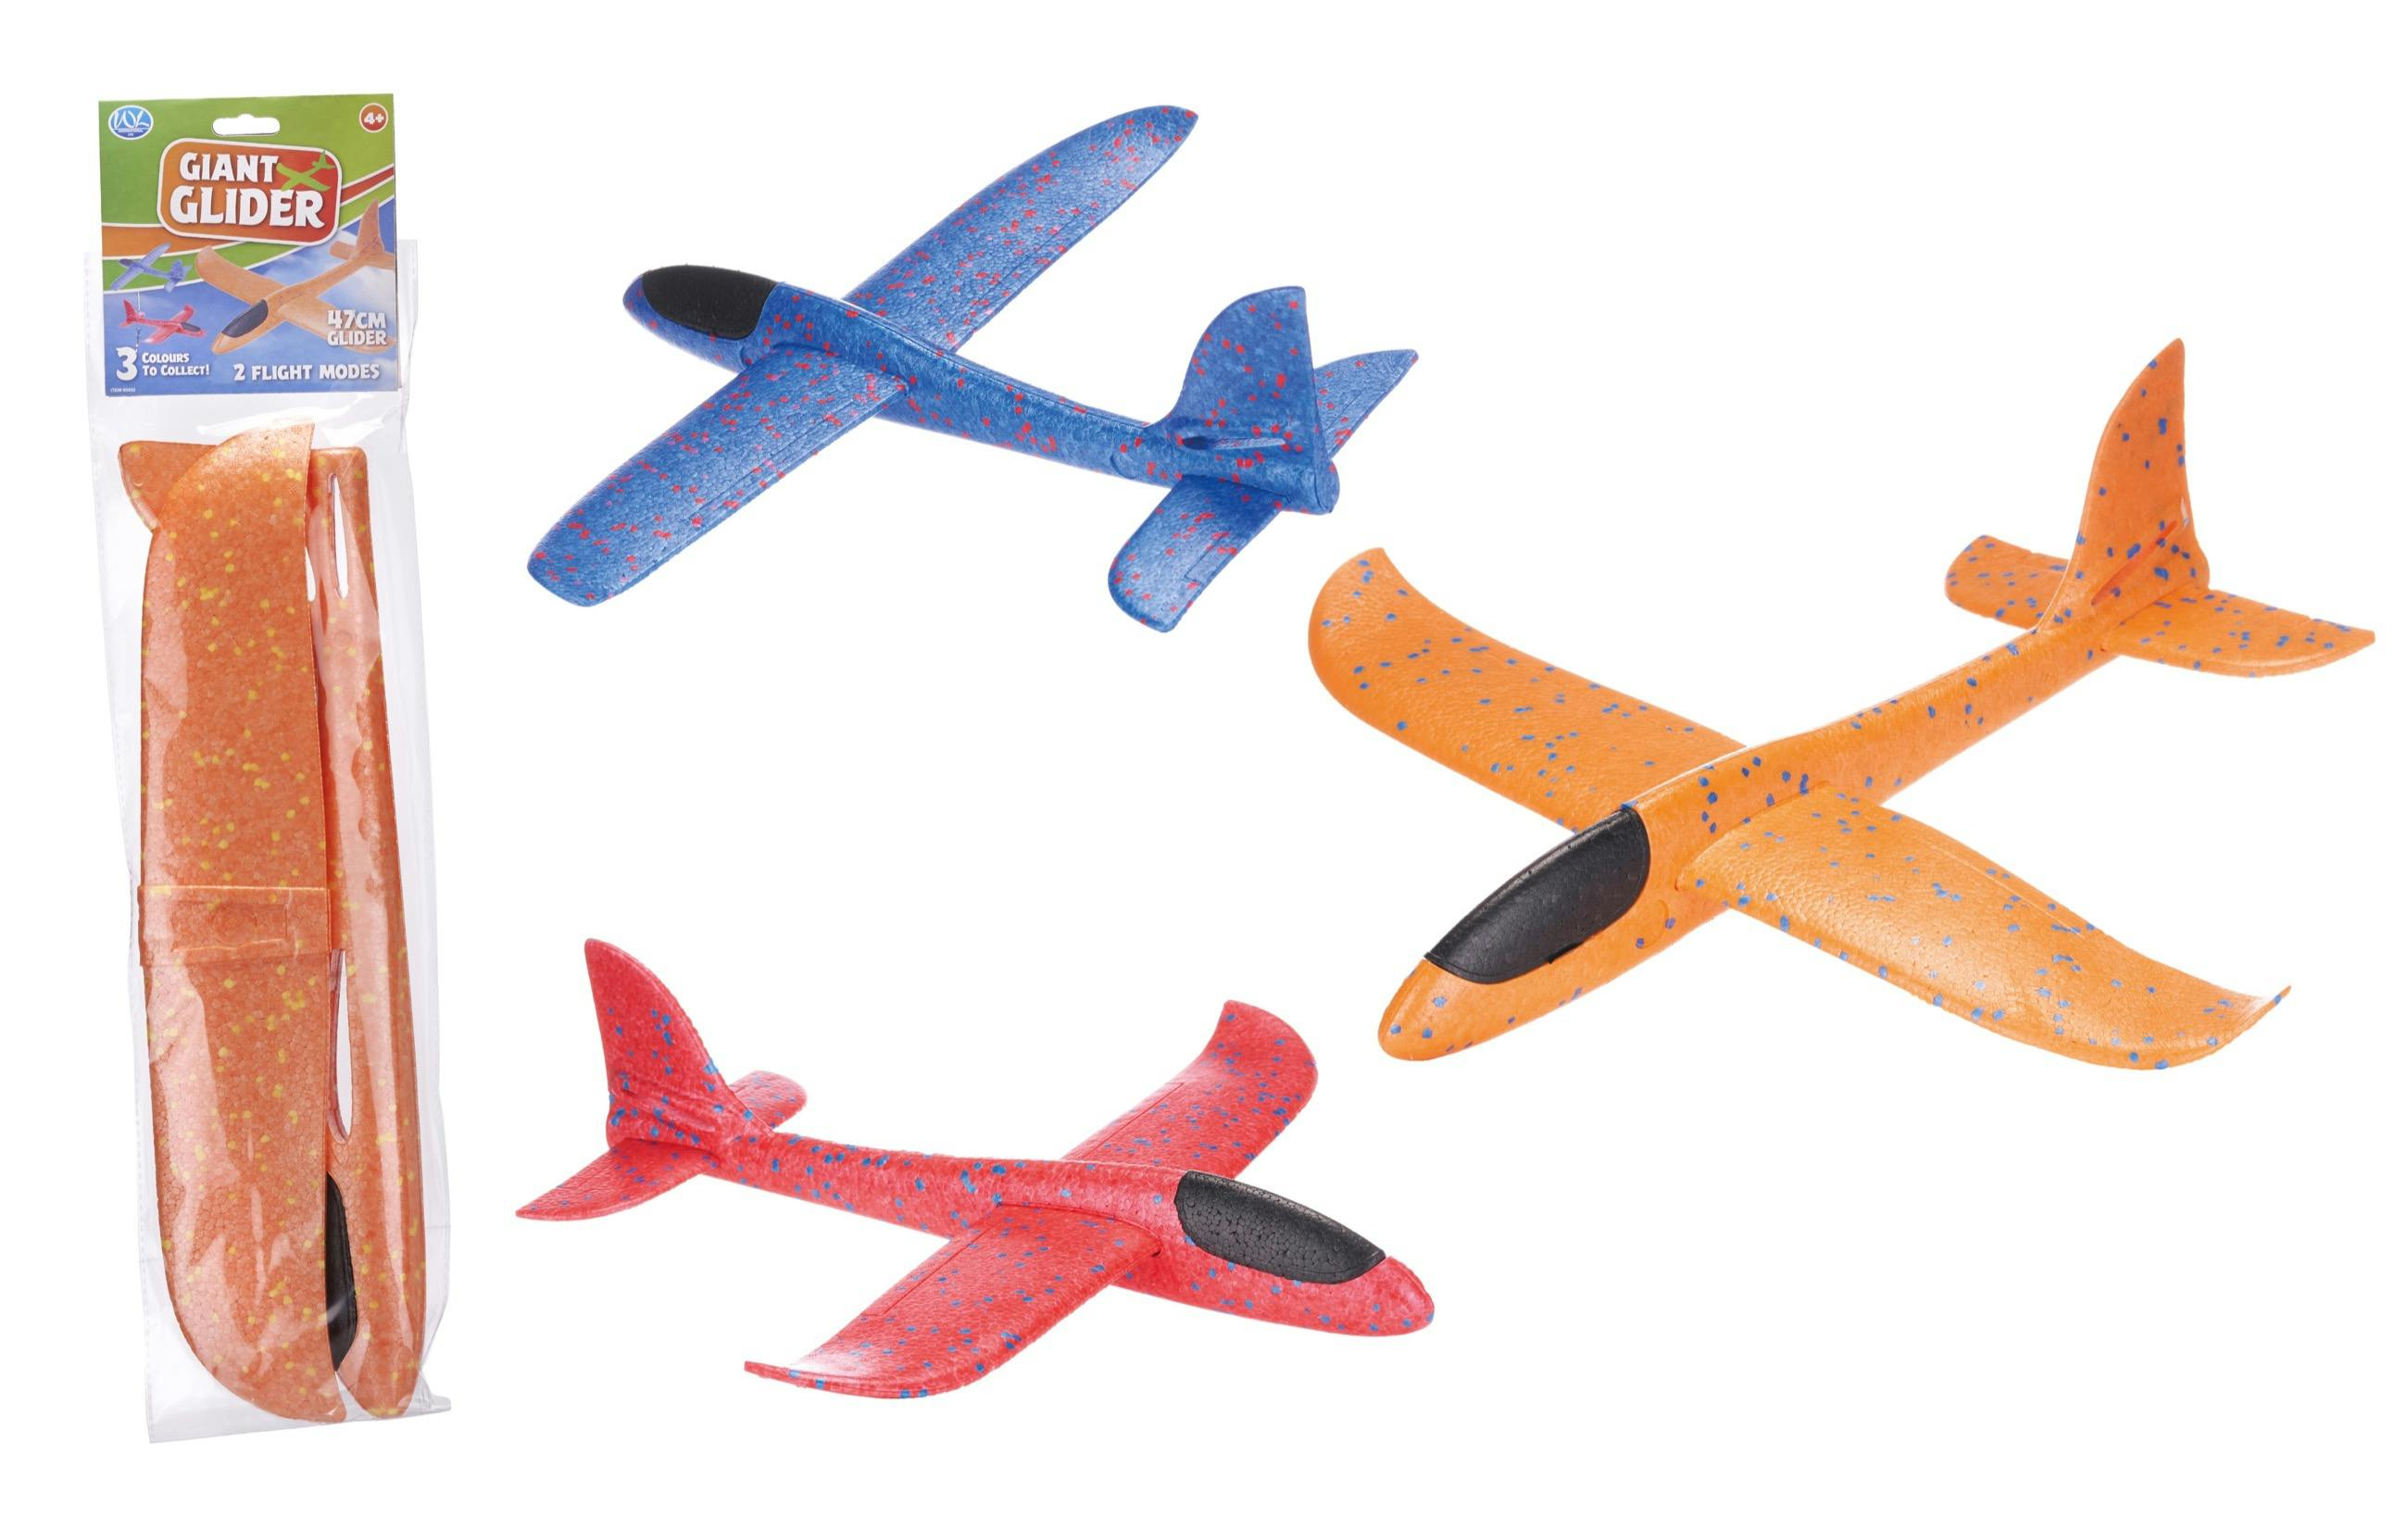 Product - Giant 47cm Glider